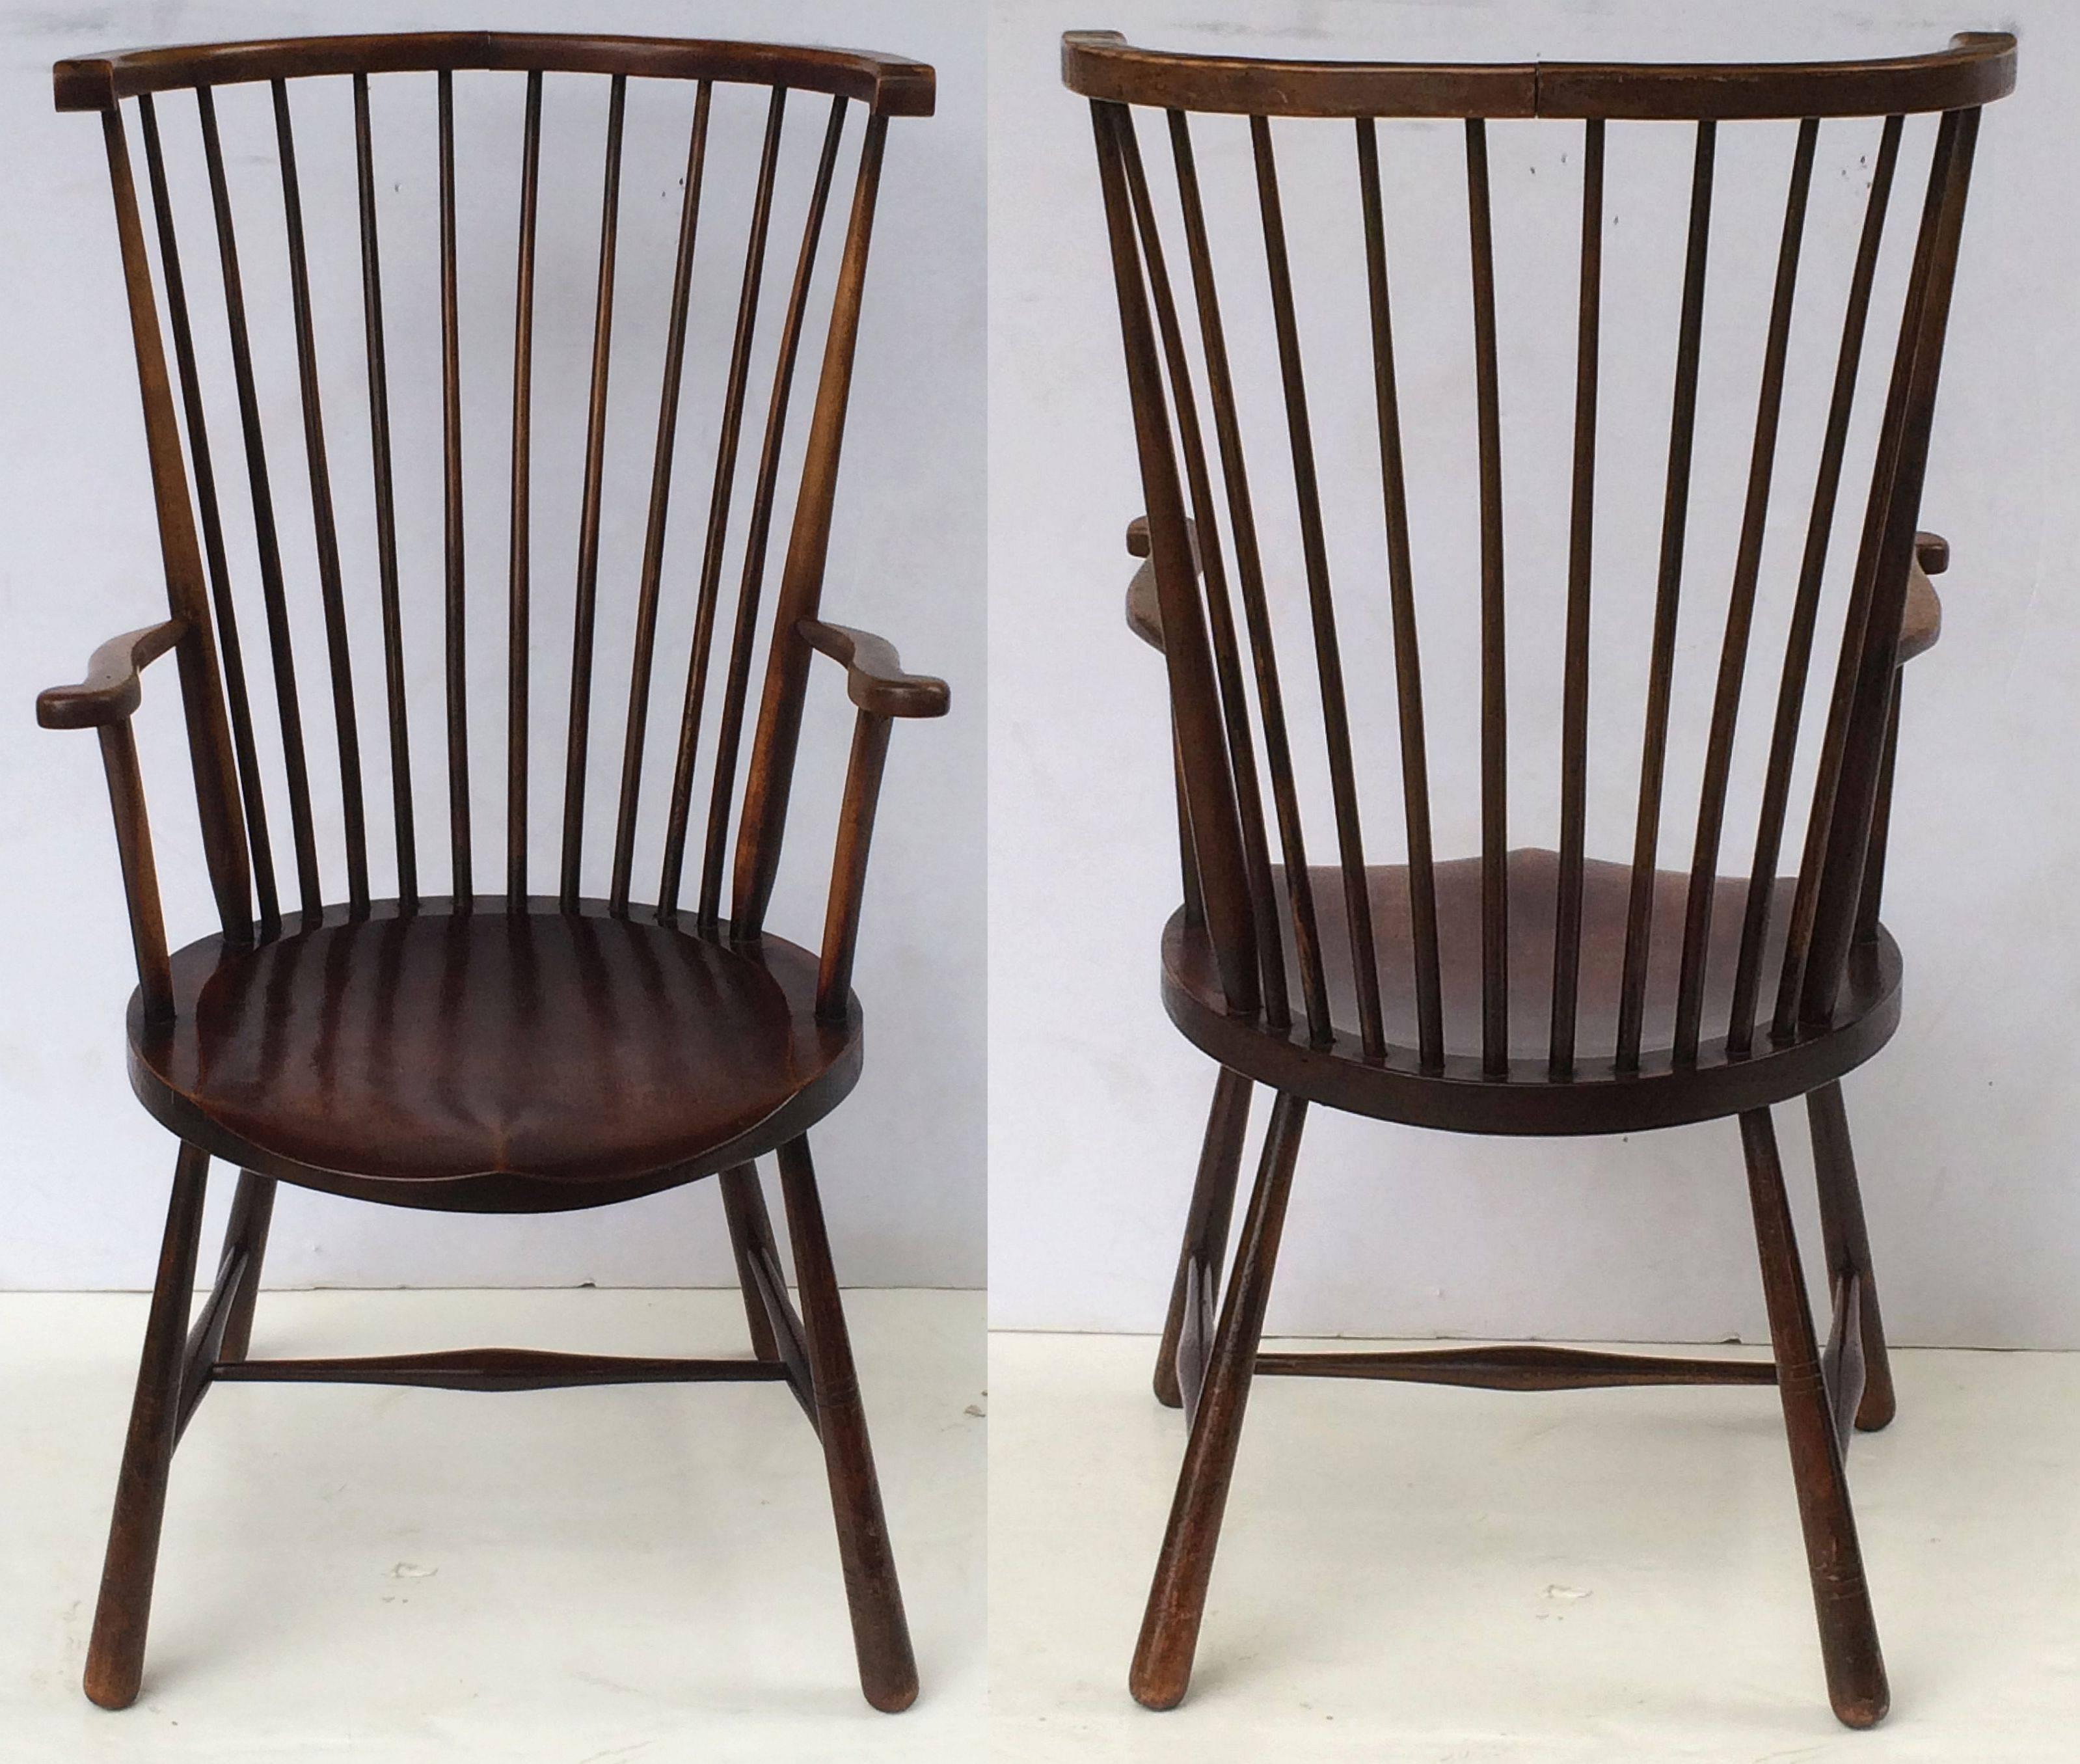 Early 20th Century Arts and Crafts Era Windsor Chair